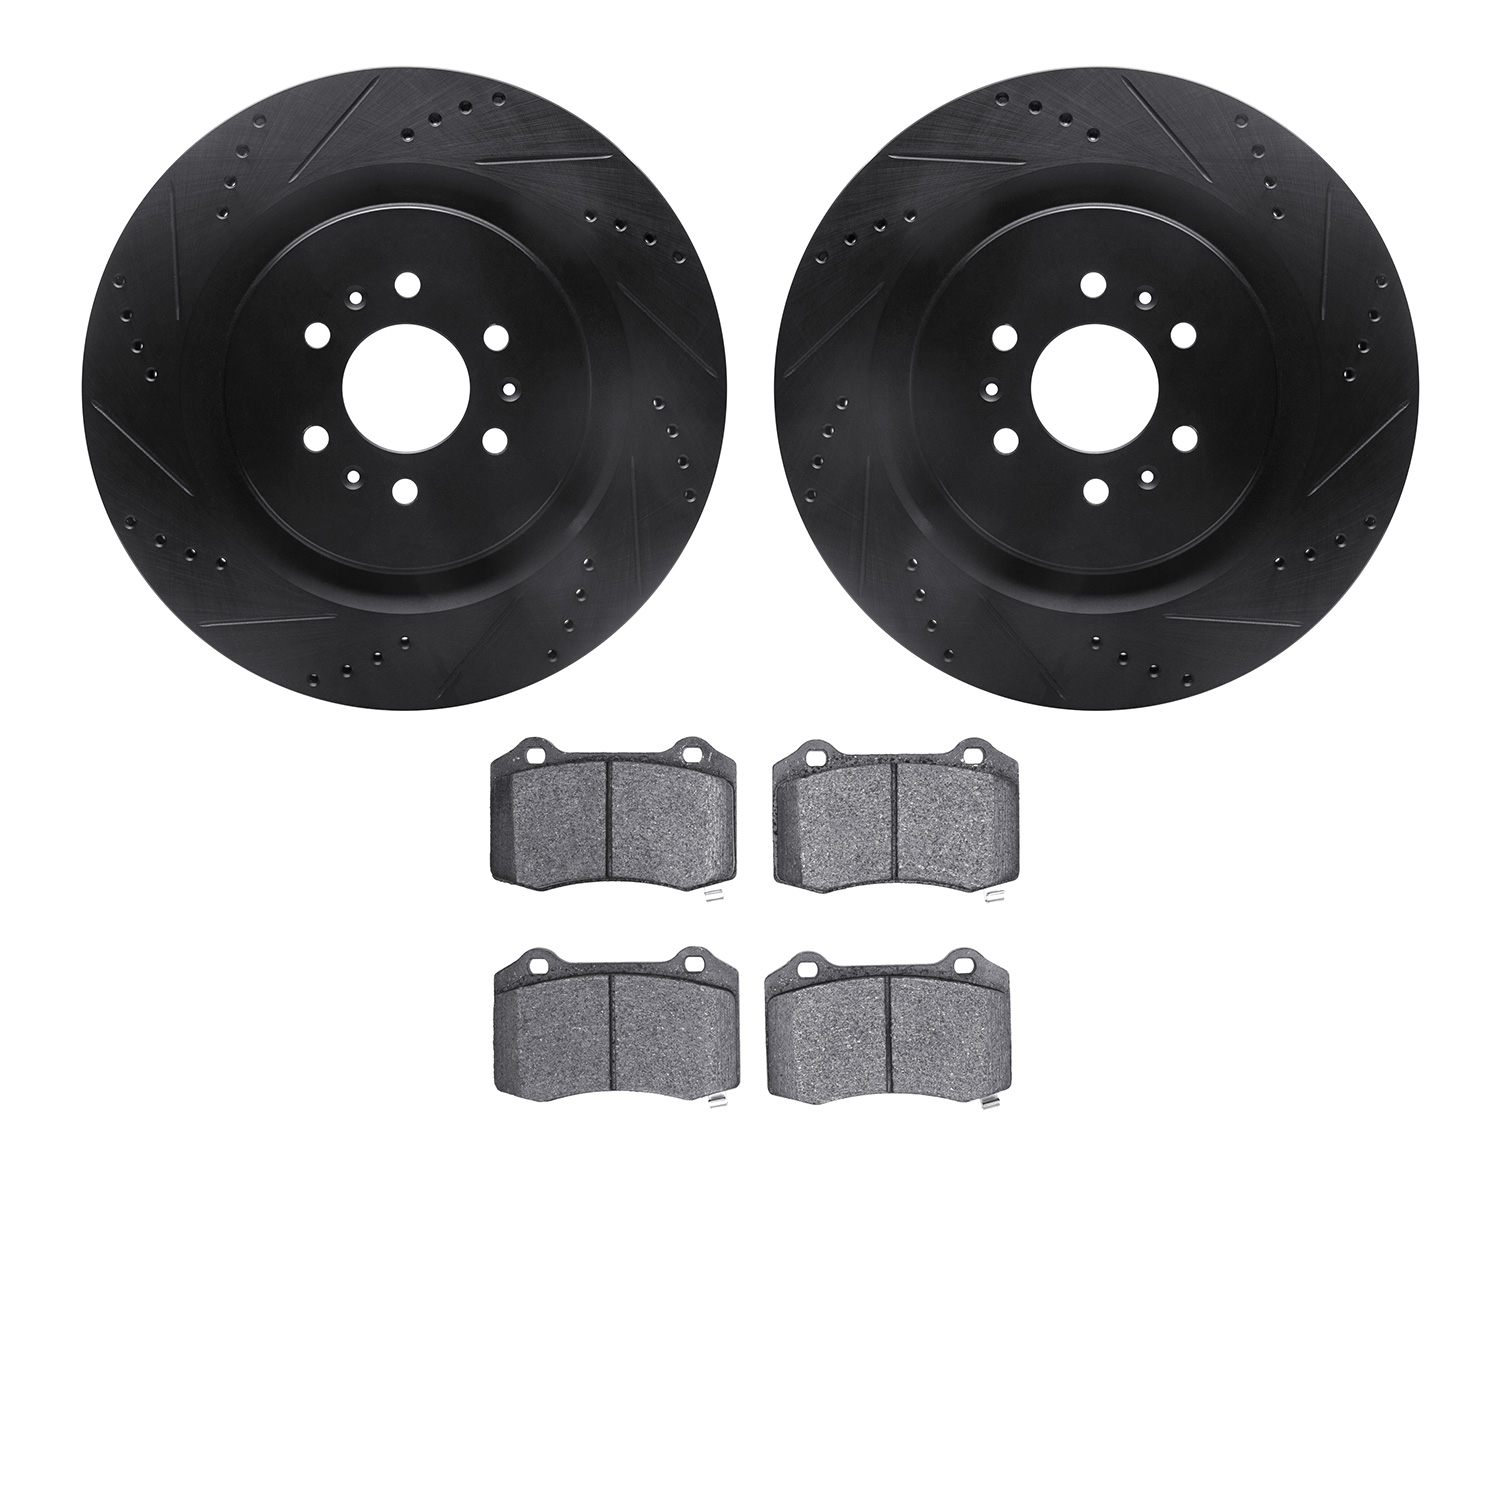 8402-46006 Drilled/Slotted Brake Rotors with Ultimate-Duty Brake Pads Kit [Black], 2004-2011 GM, Position: Rear